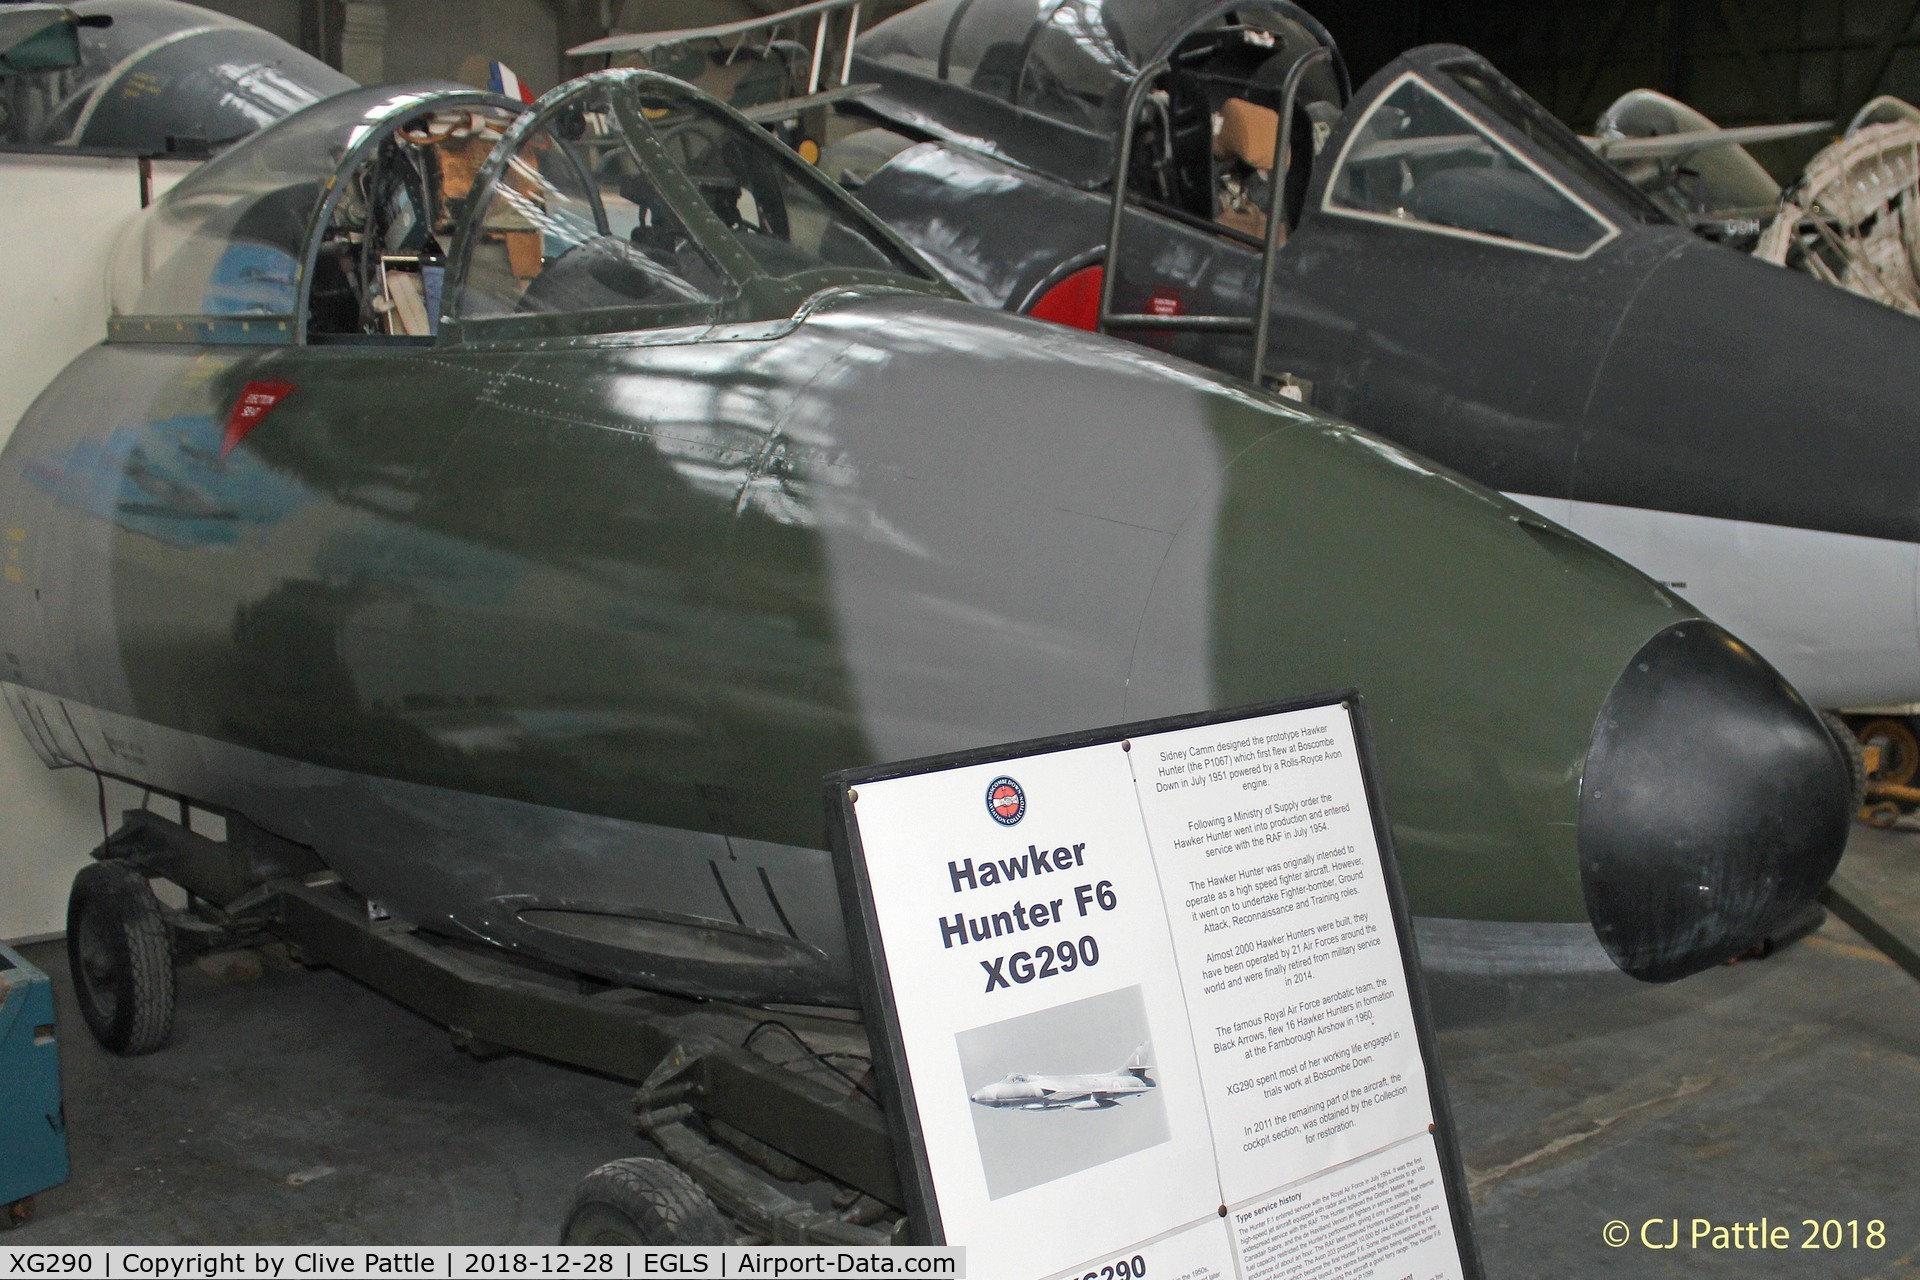 XG290, 1956 Hawker Hunter F.6 C/N 41H/680077, Cockpit - Preserved at the Boscombe Down Aviation Collection (BDAC) at Old Sarum Airfield , EGLS. On loan from the Tony Dyer's Air Defence Collection. Ex 8711M.